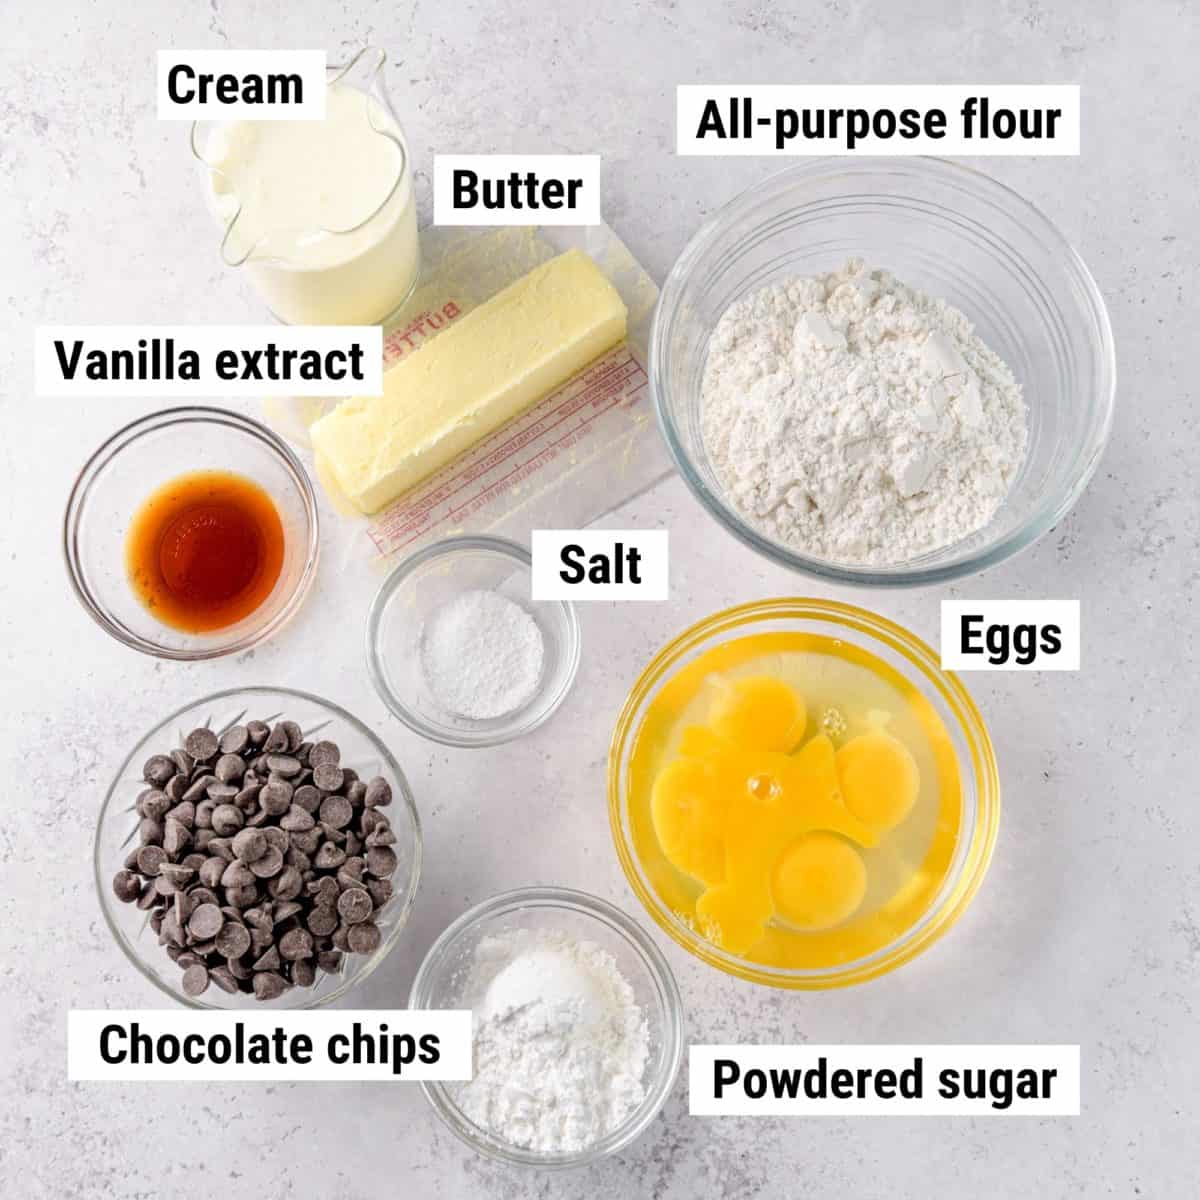 The ingredients used to make frozen cream puffs laid out on a table.